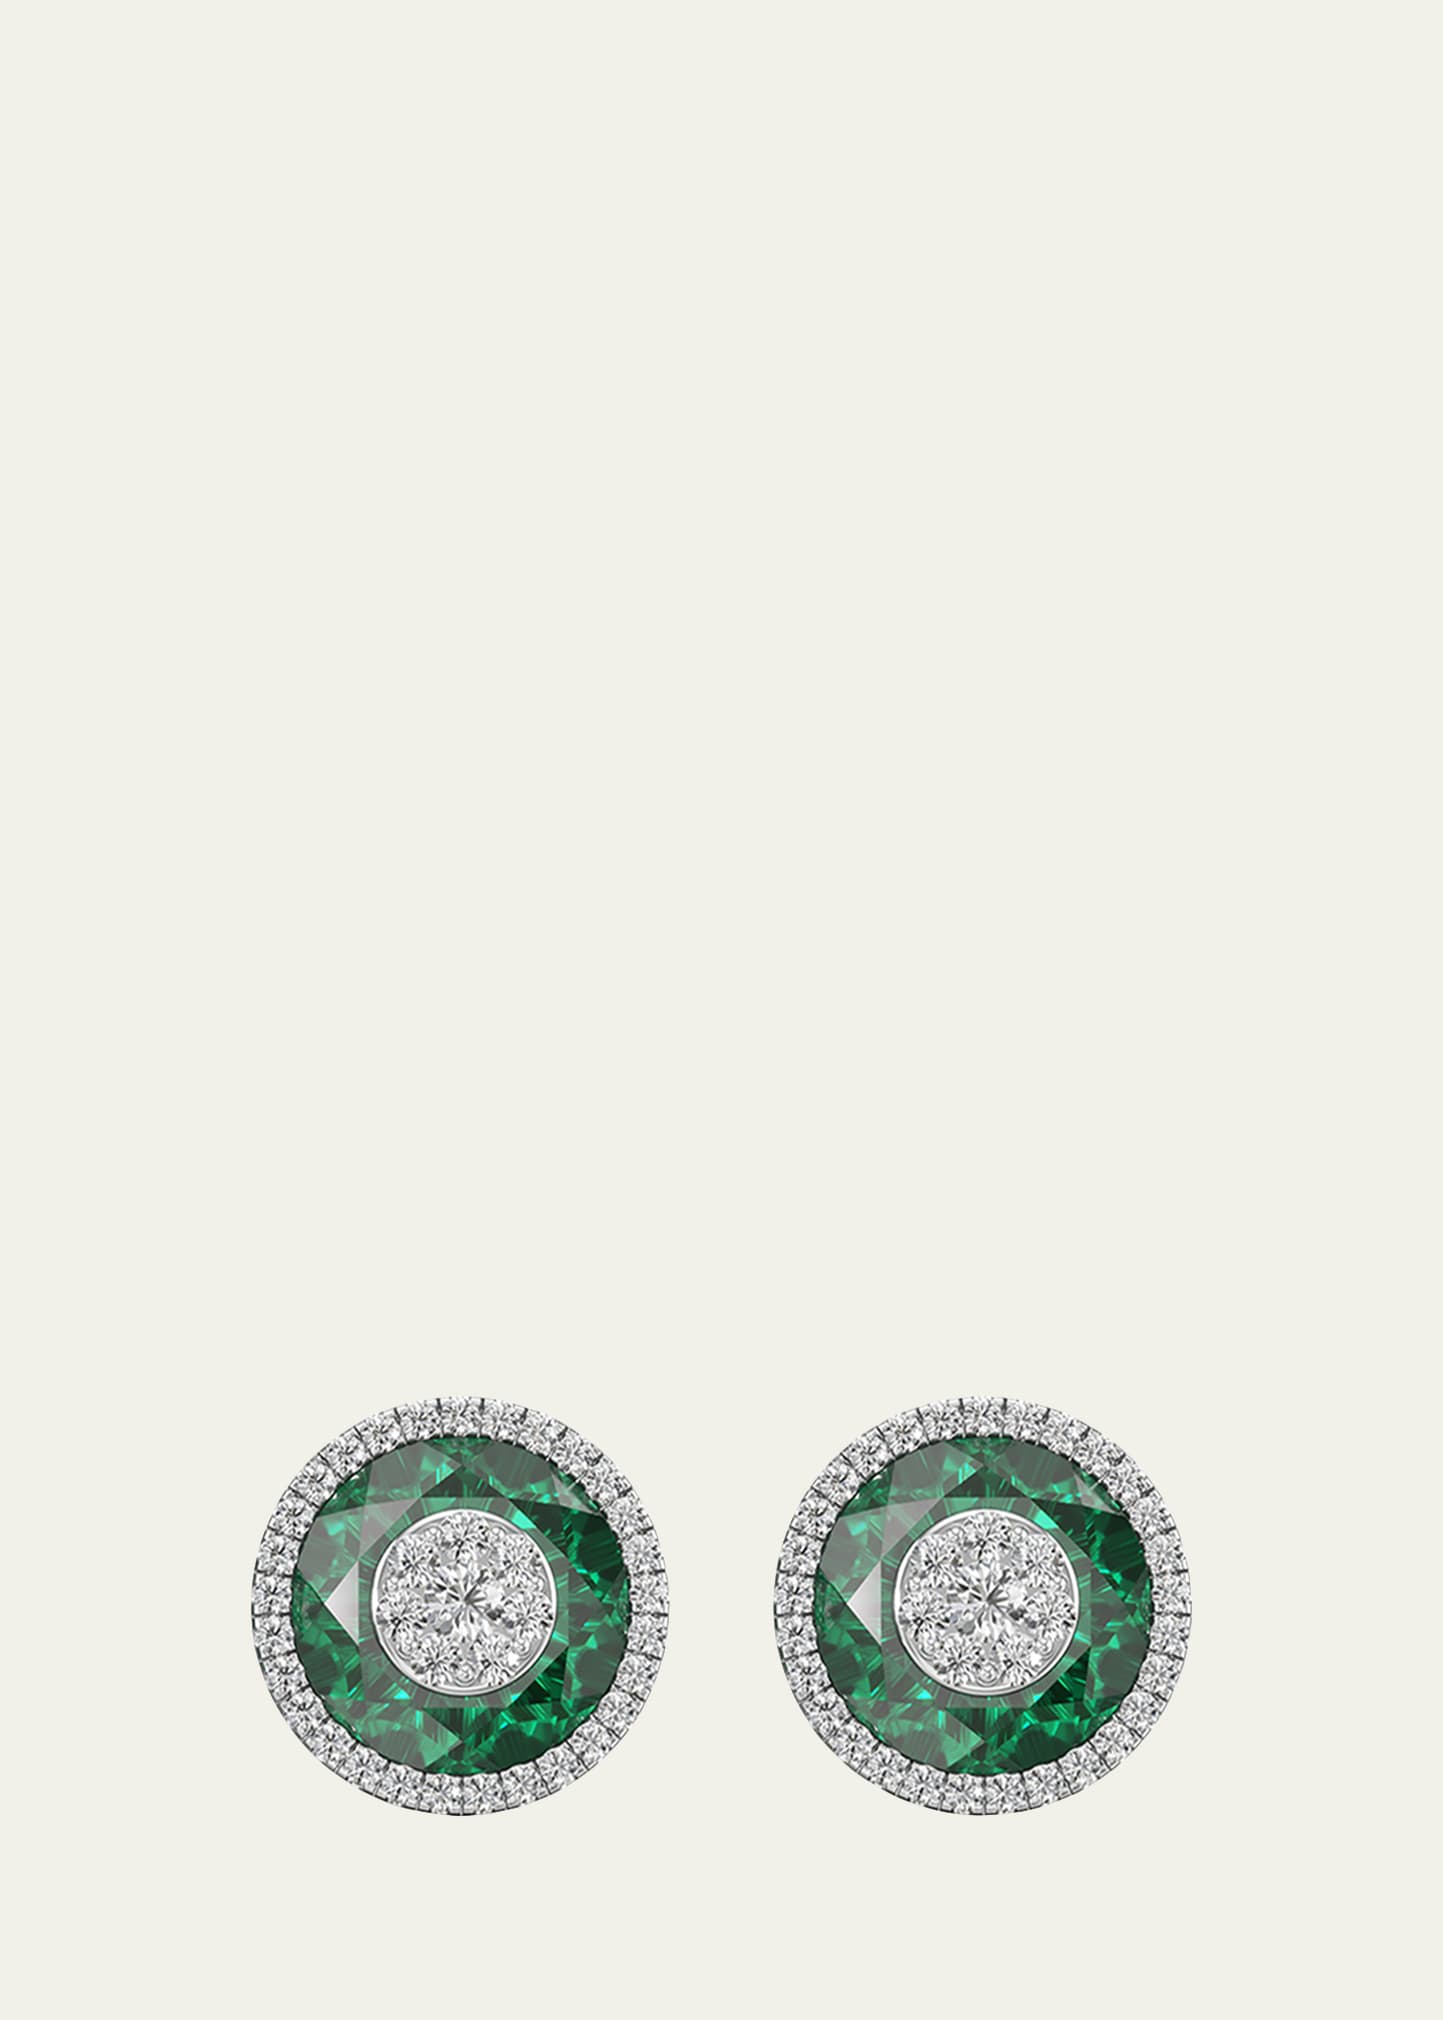 Bhansali 18k White Gold 10mm Halo Stud Earrings With Diamonds In Green